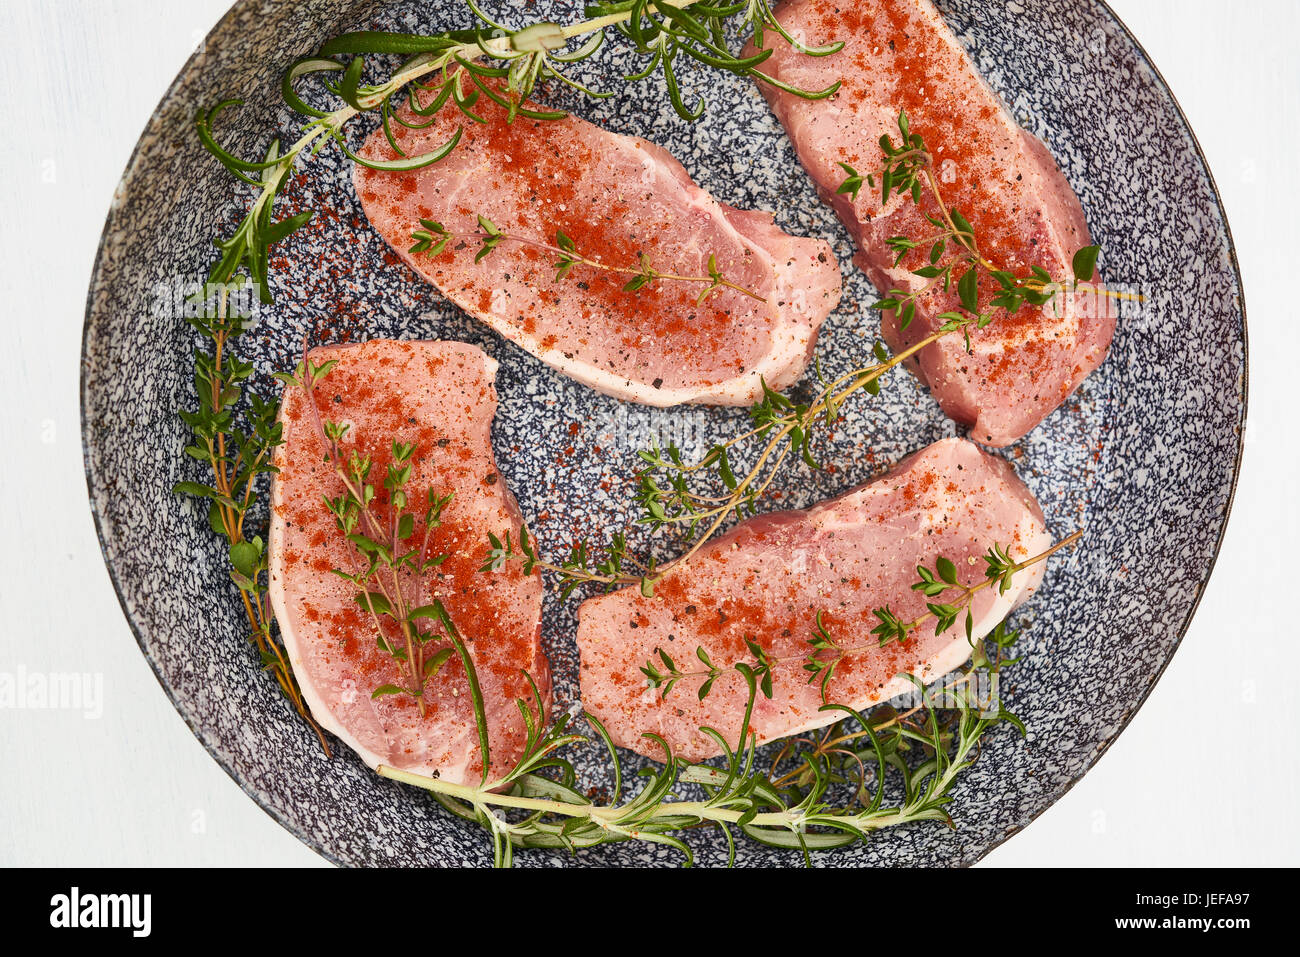 Raw pork chops in pan ready for cooking Stock Photo